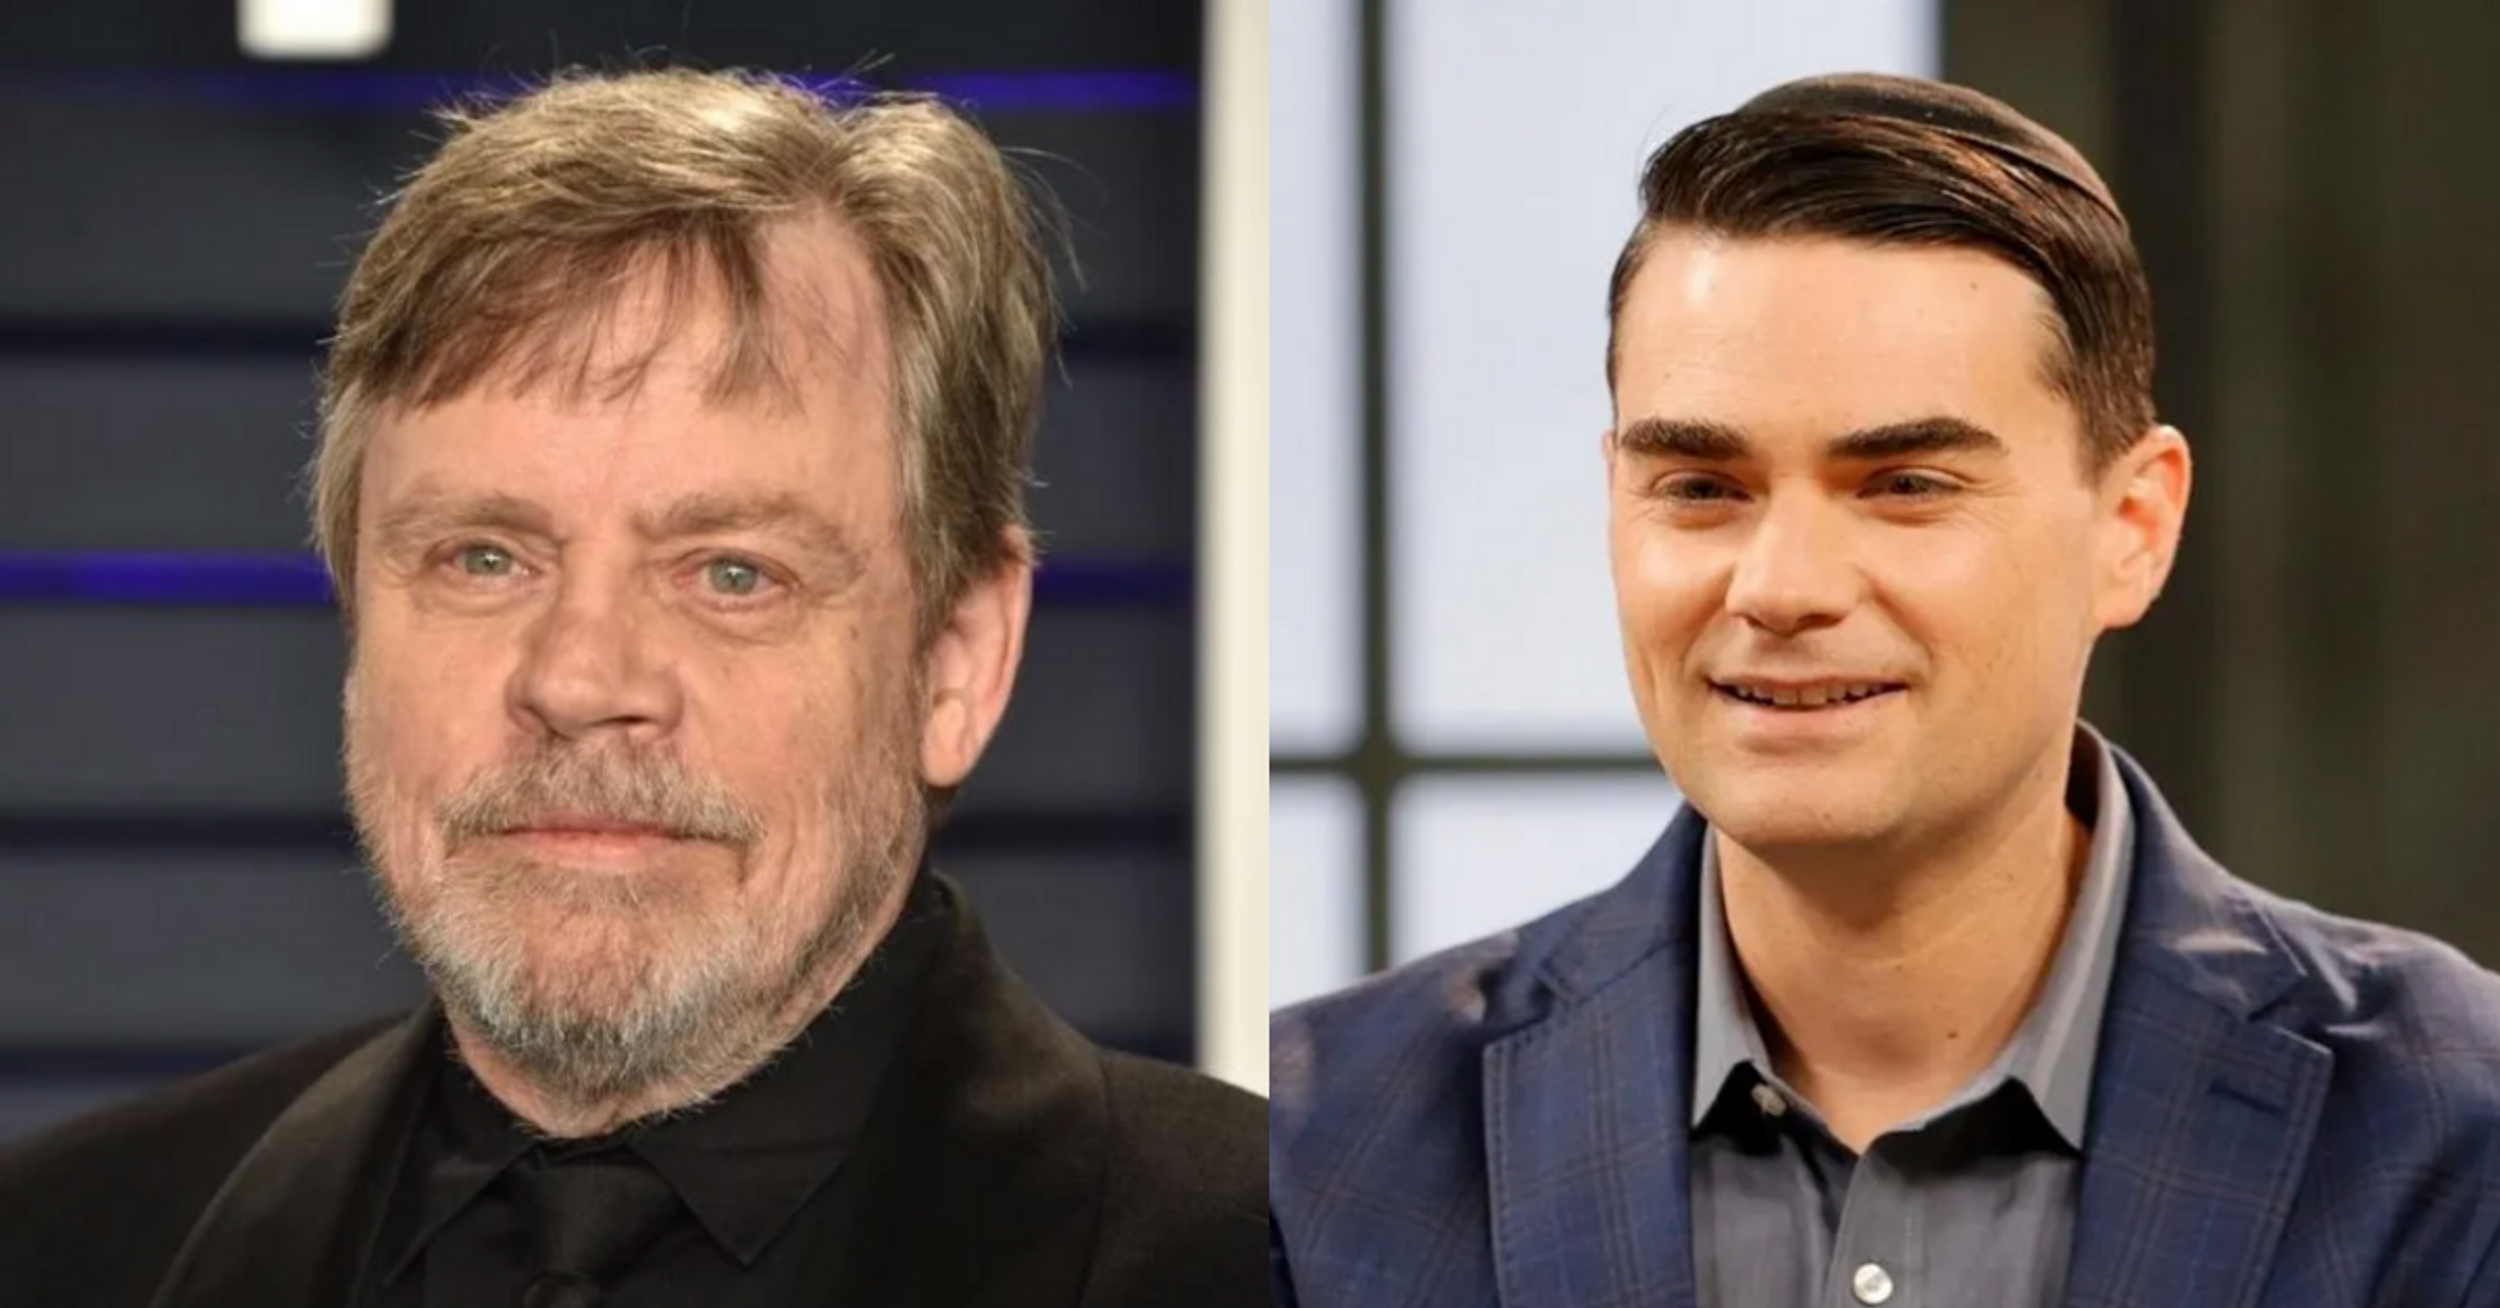 Mark Hamill Obliterates Ben Shapiro For Claiming He's Trying To 'Indoctrinate' Kids With 'Gay' Tweet